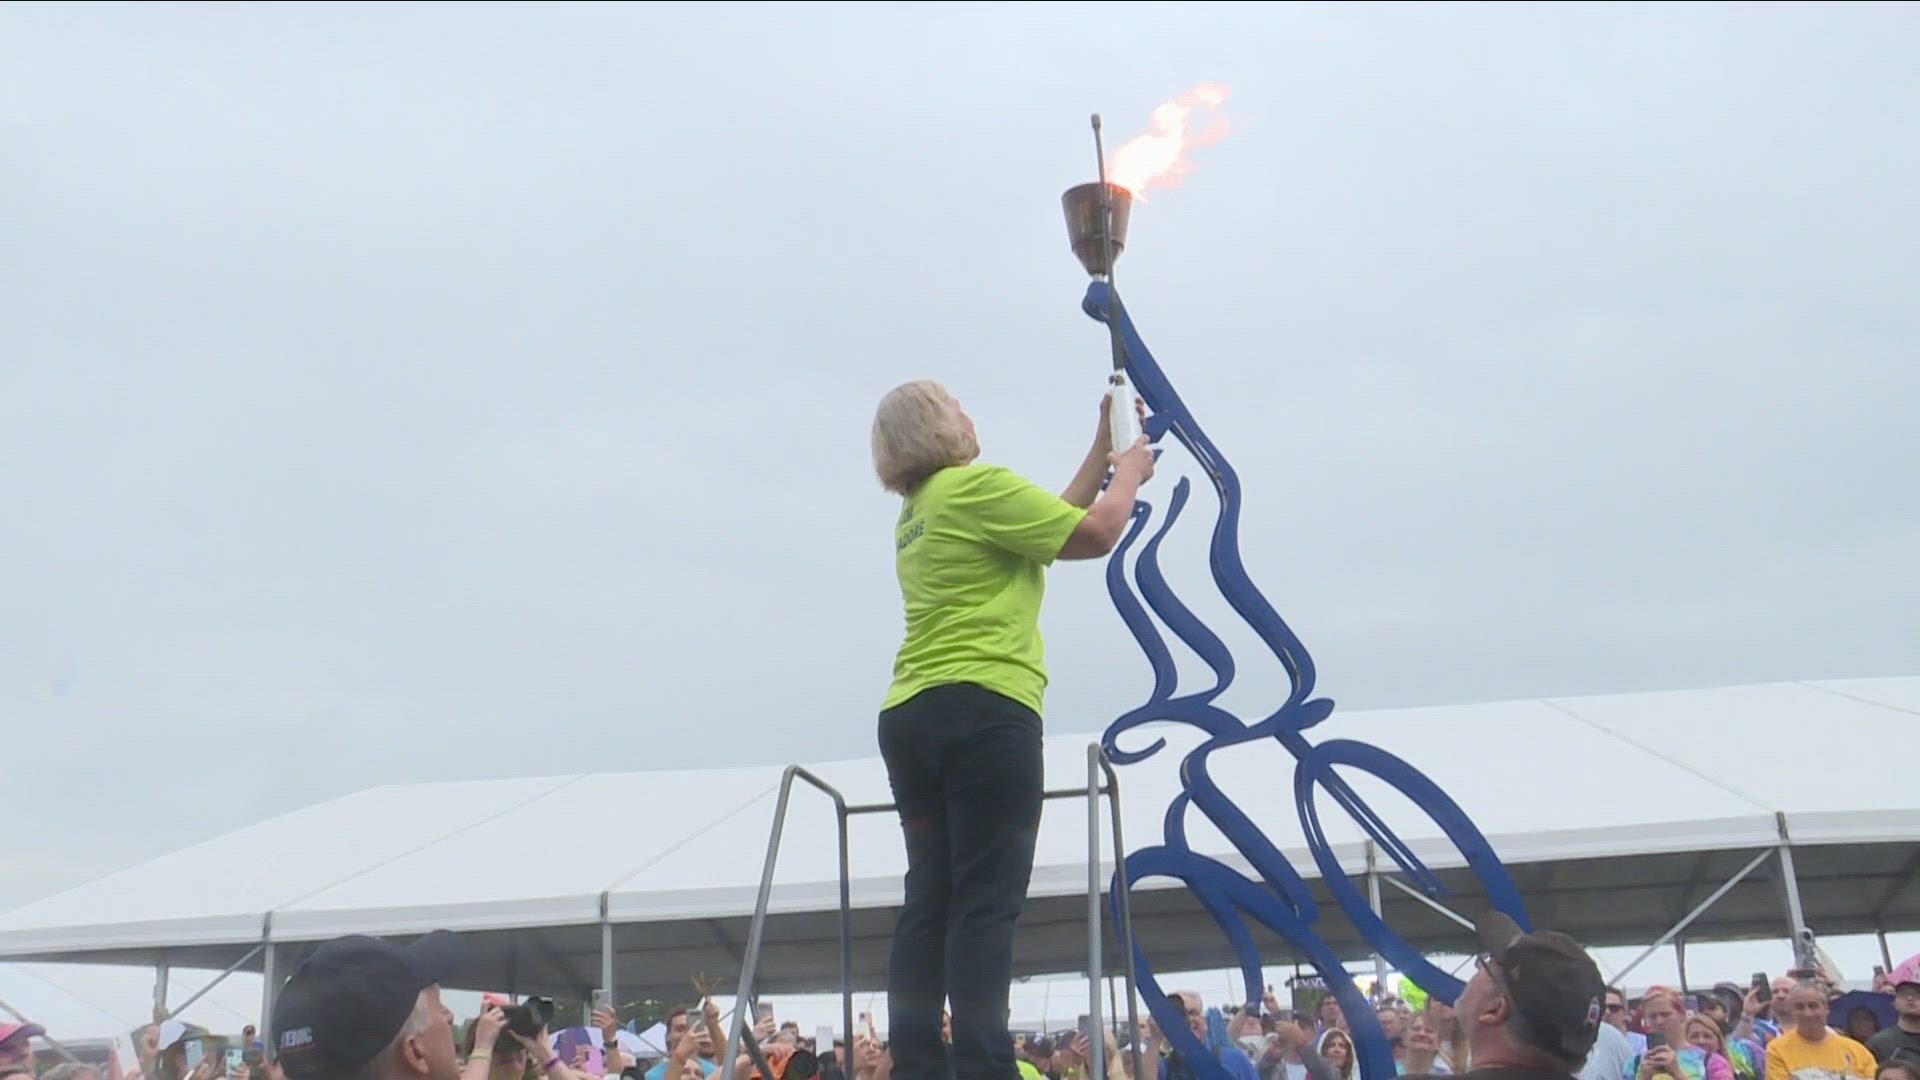 The celebration kicked off the 28th annual Ride for Roswell.